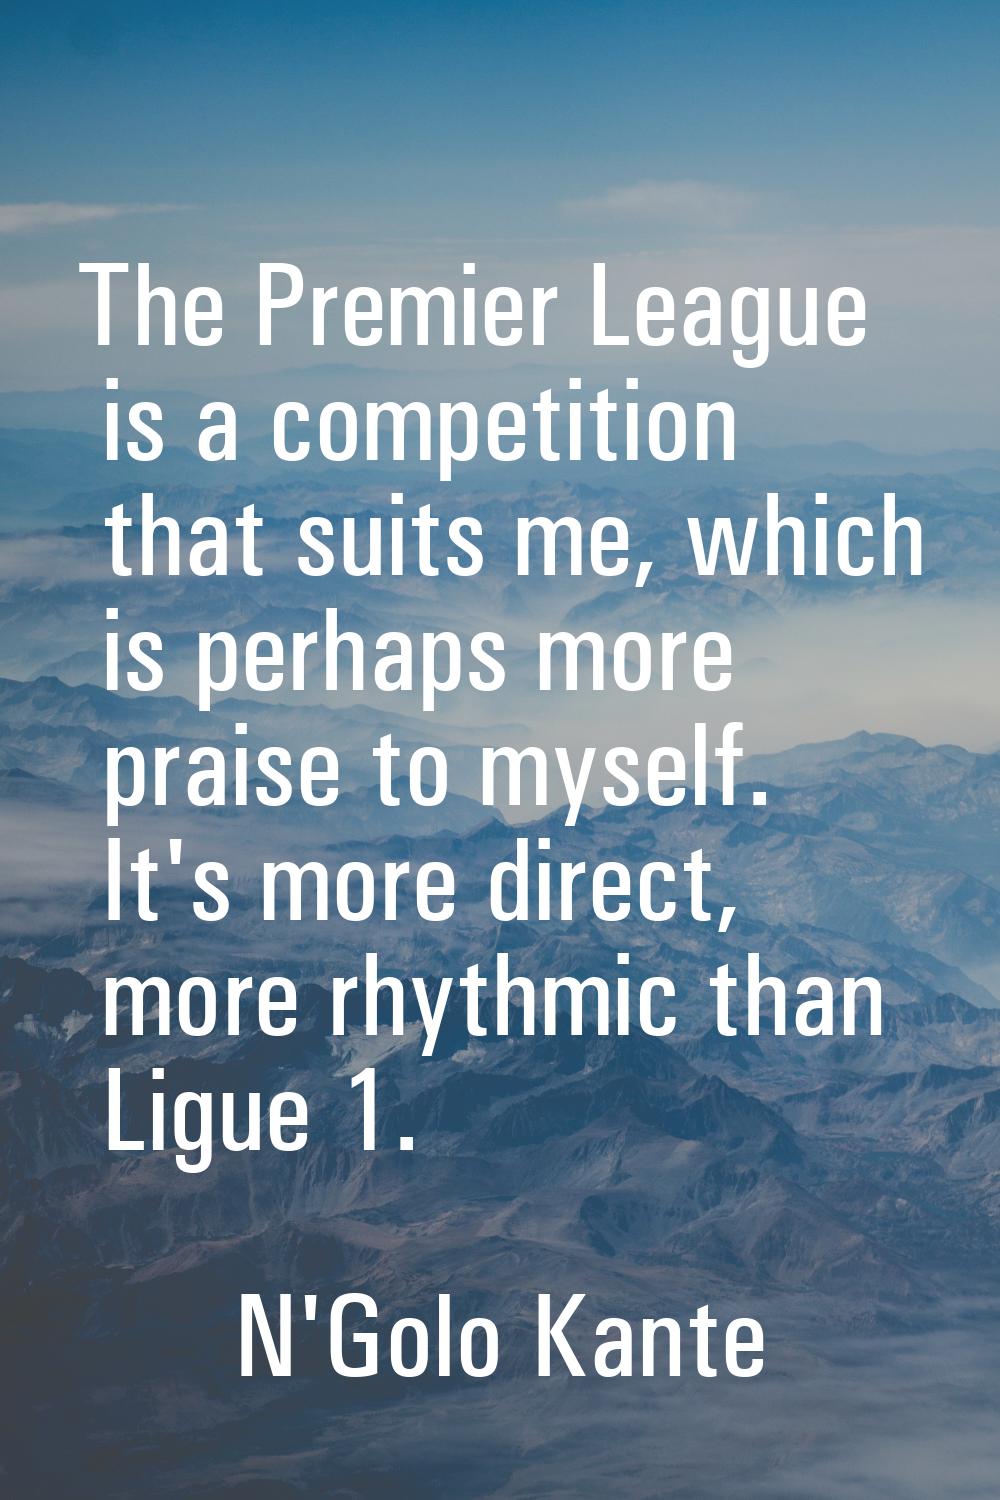 The Premier League is a competition that suits me, which is perhaps more praise to myself. It's mor